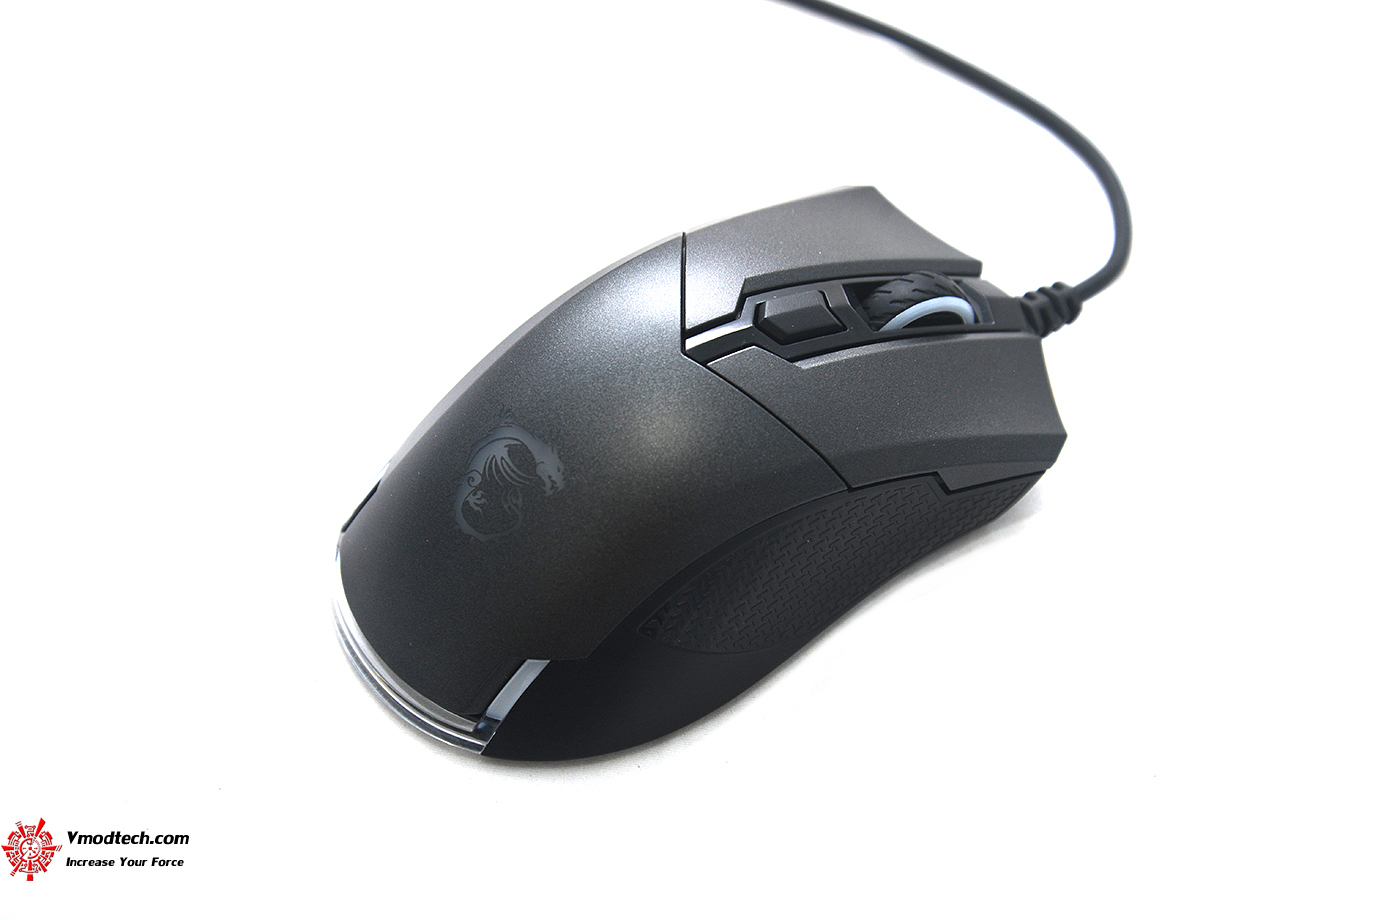 dsc 49461 MSI CLUTCH GM50 GAMING MOUSE REVIEW